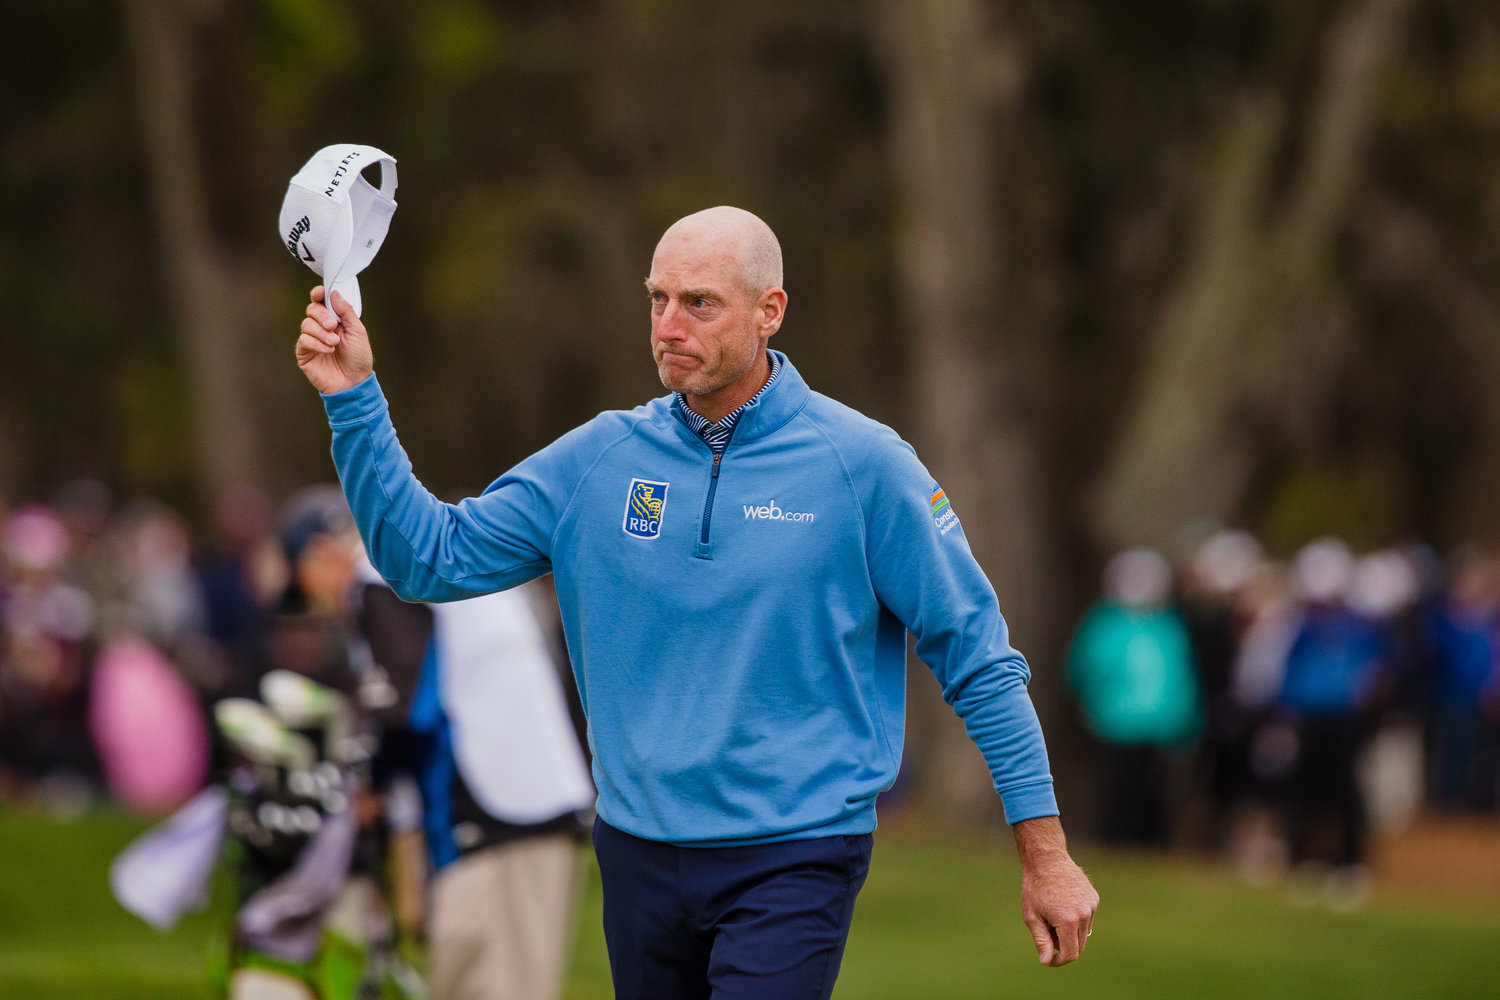 An emotional Jim Furyk tips his hat to fans as he closes out his final round at THE PLAYERS on Sunday. He finished runner-up to Rory McIlroy.